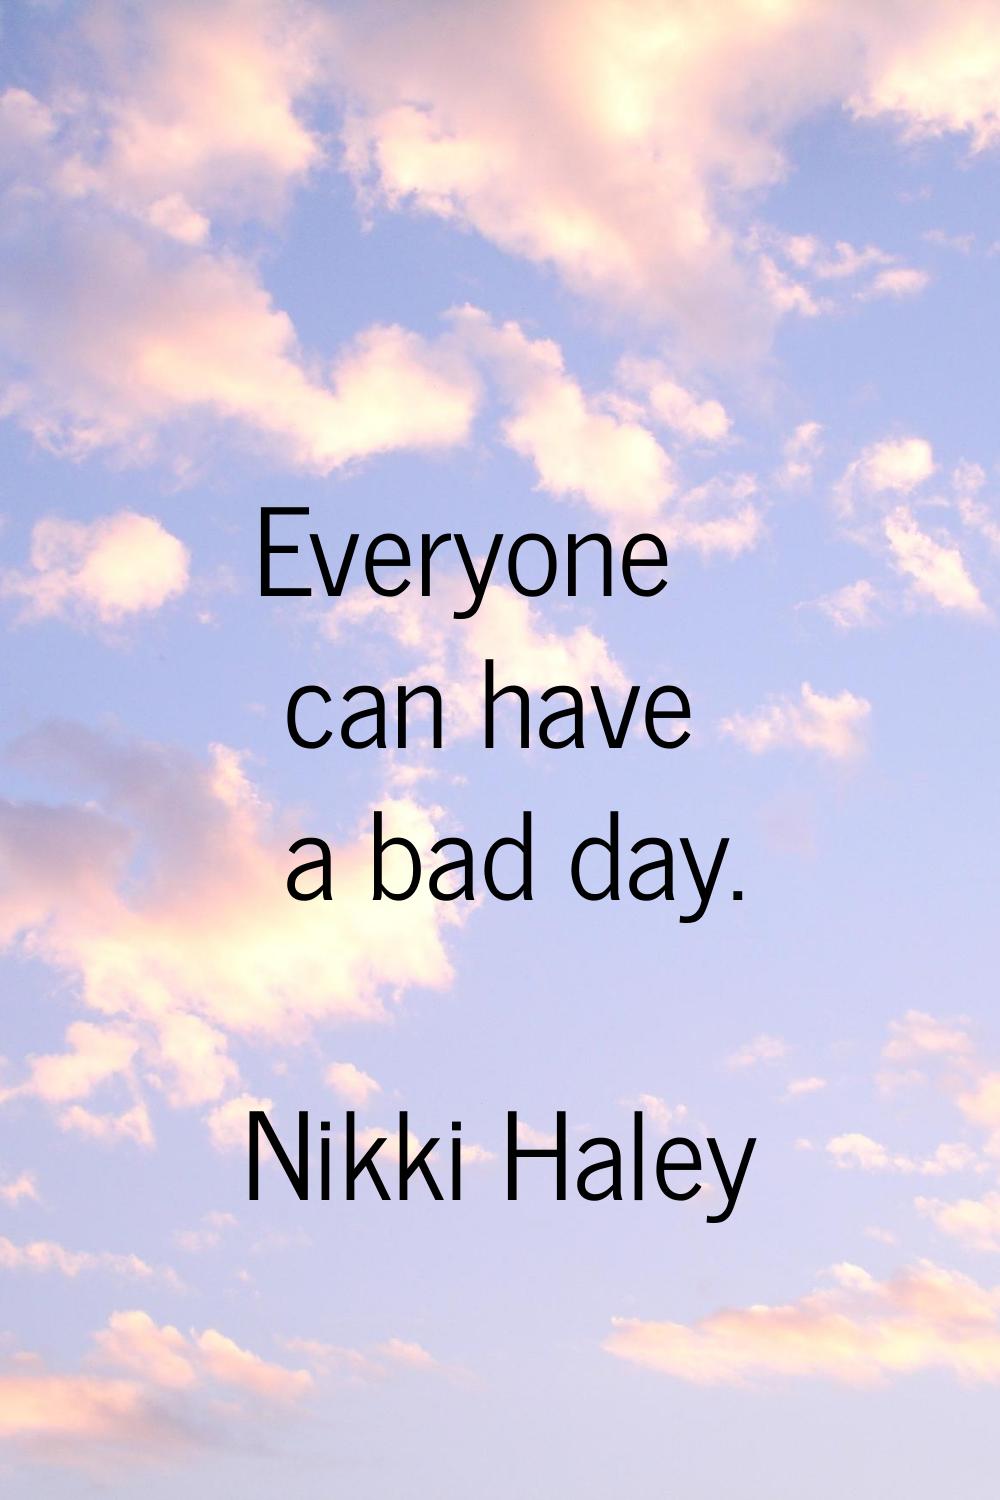 Everyone can have a bad day.